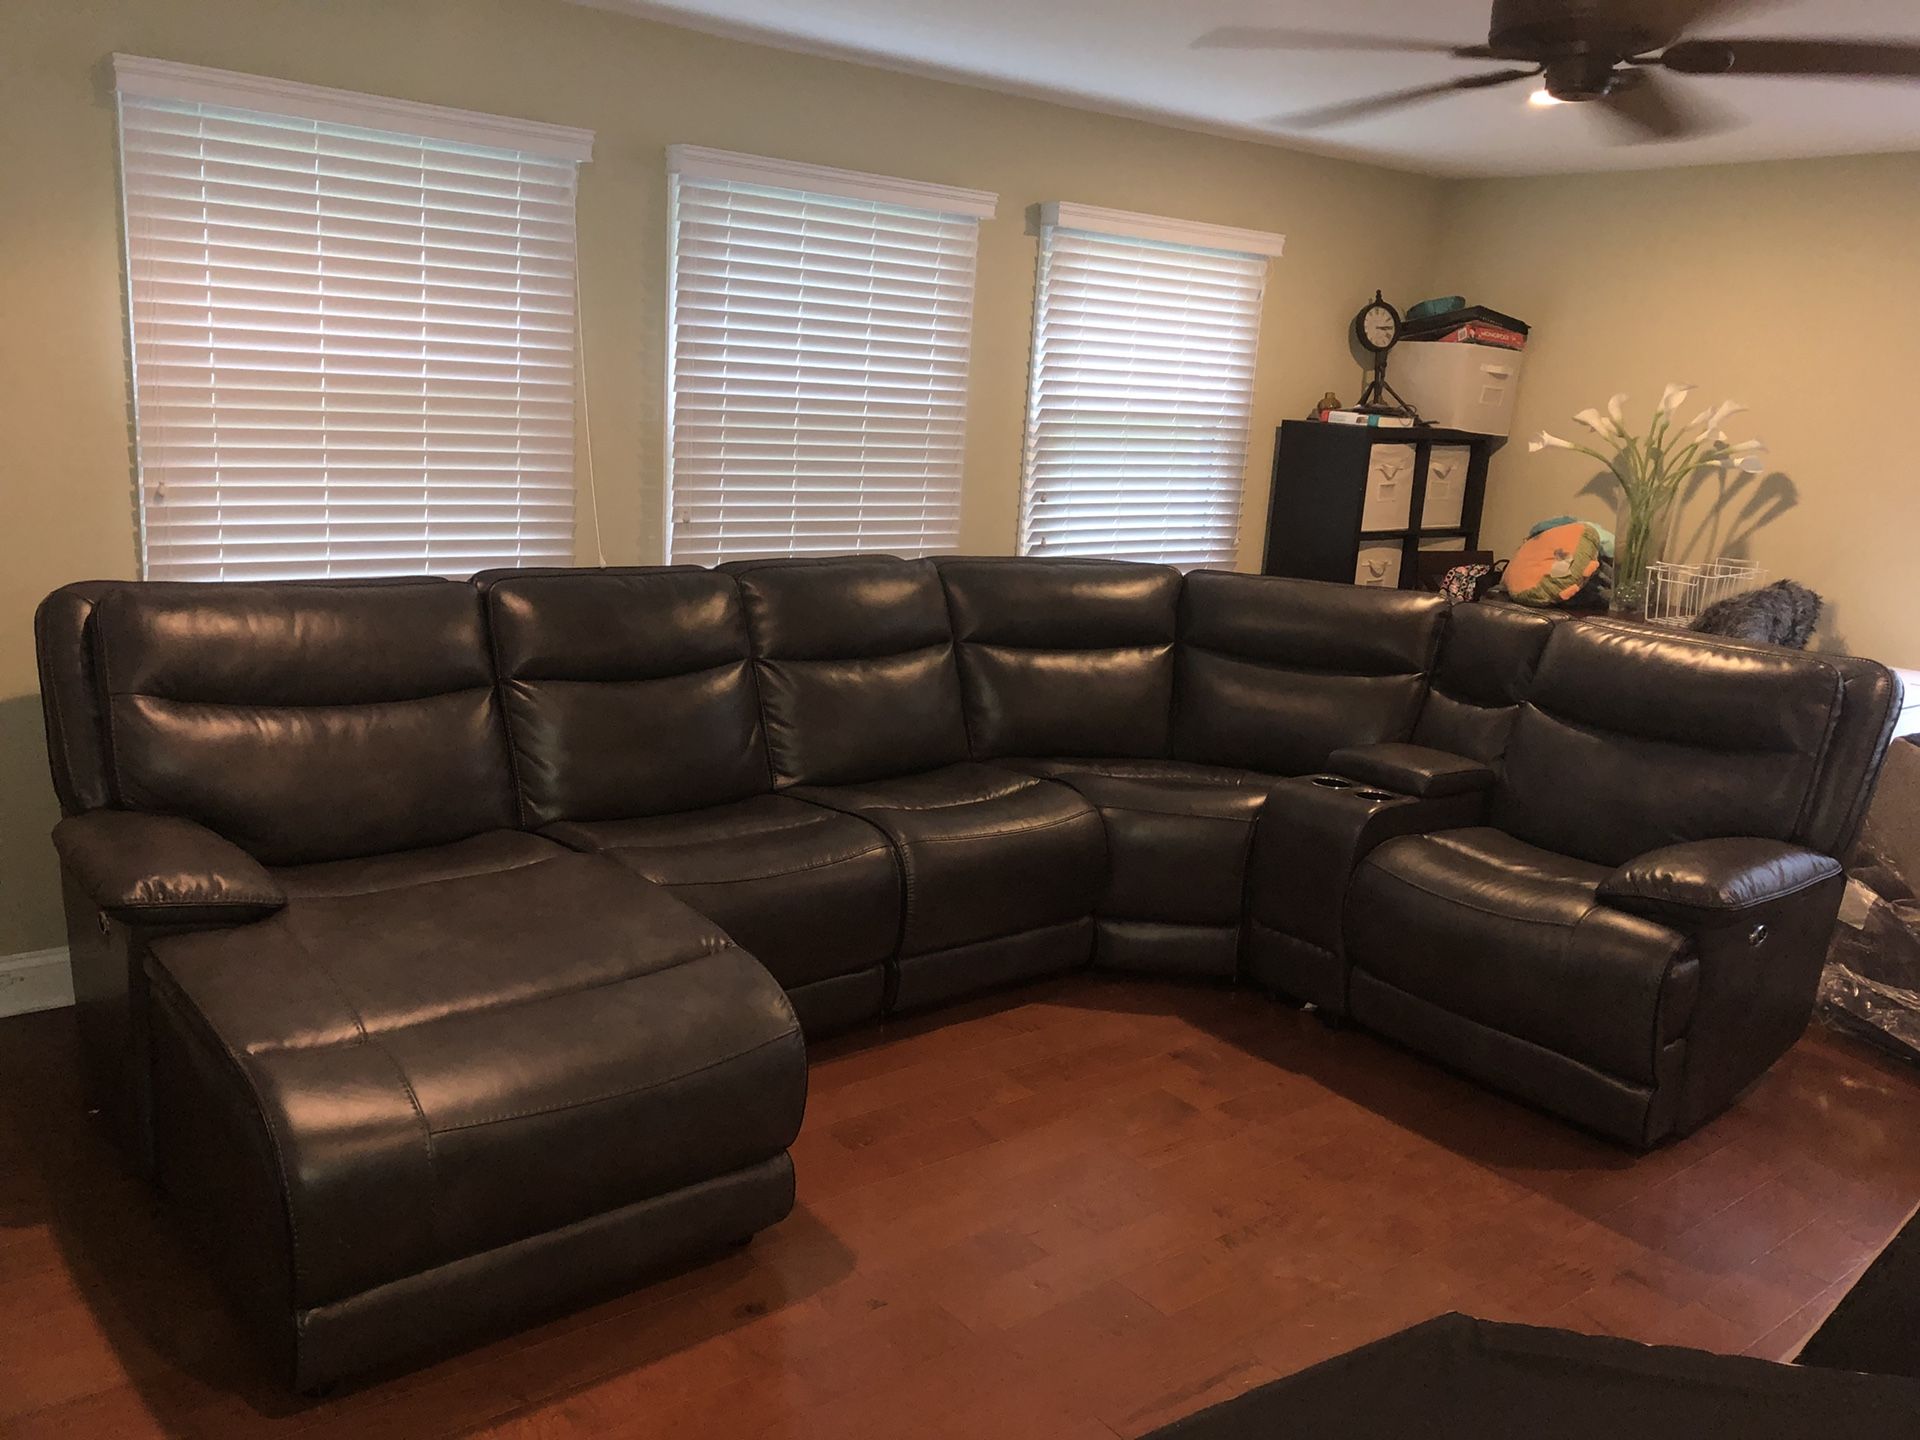 Price Drop on Beautiful Big comfy sectional for sale $1000 Today Only Need The Space